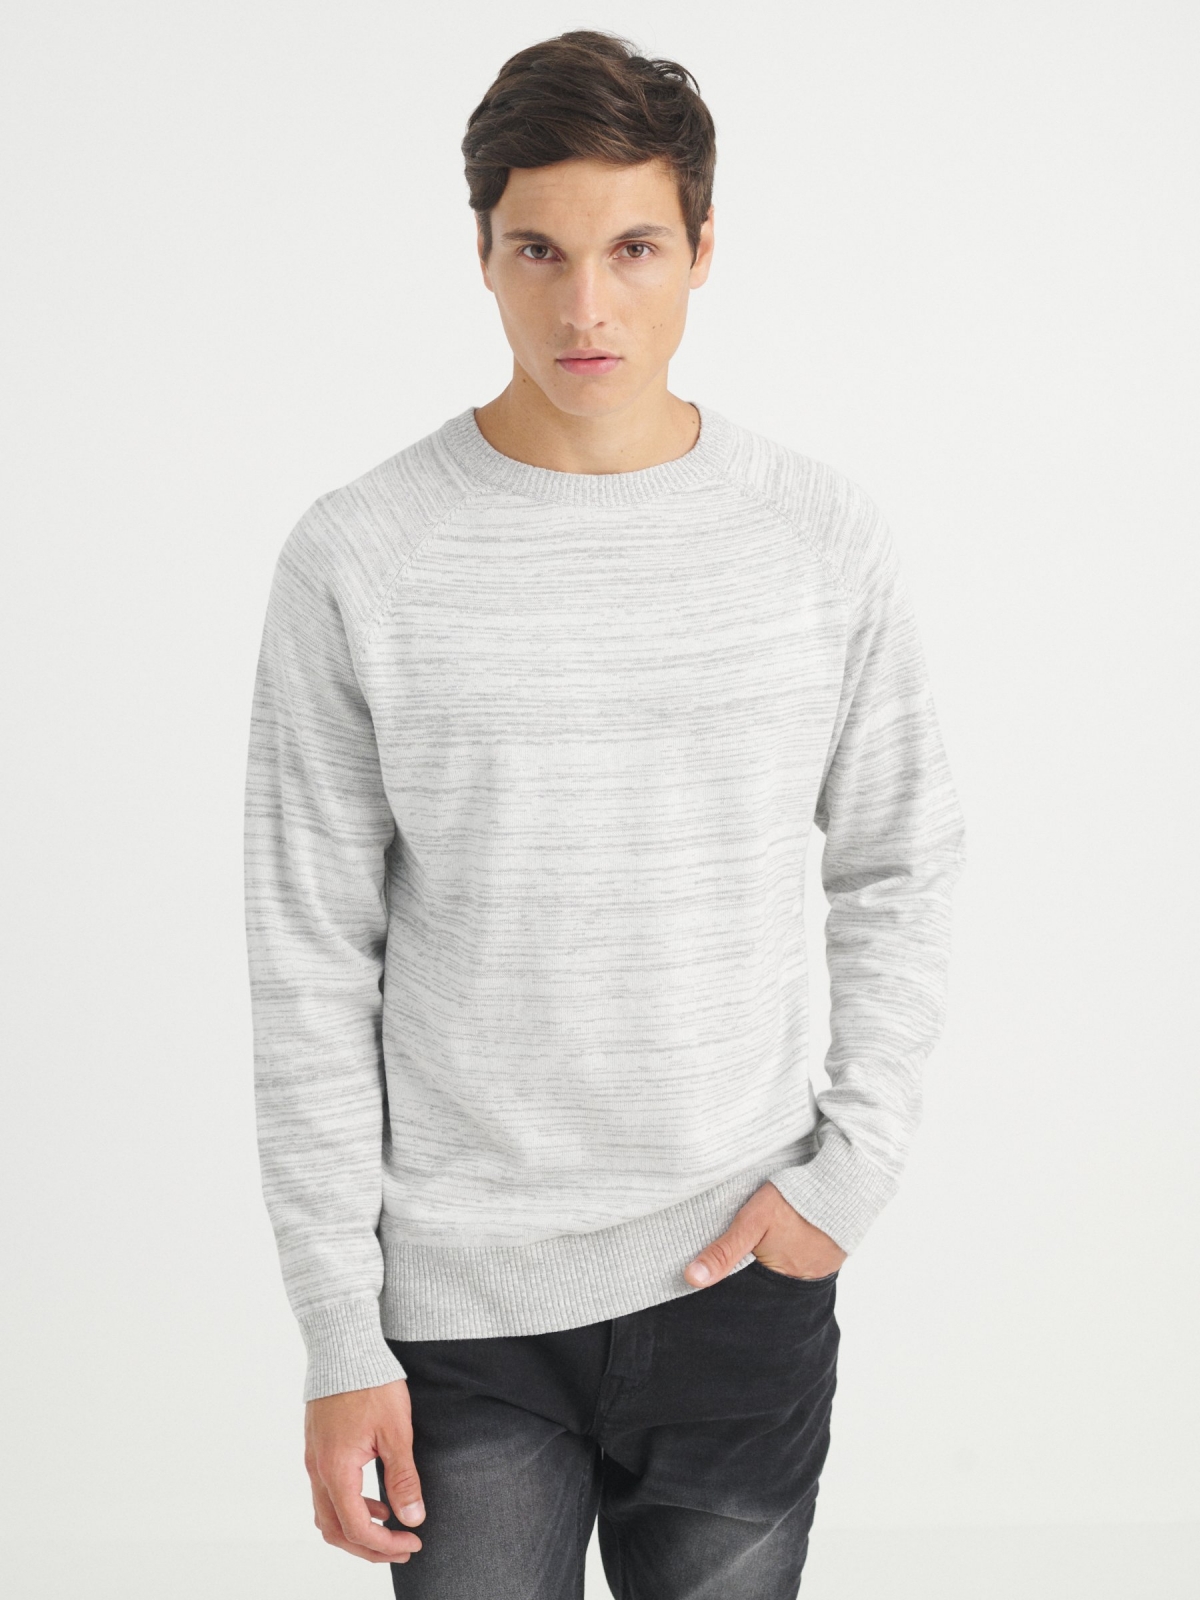 Basic mottled sweater light grey middle front view